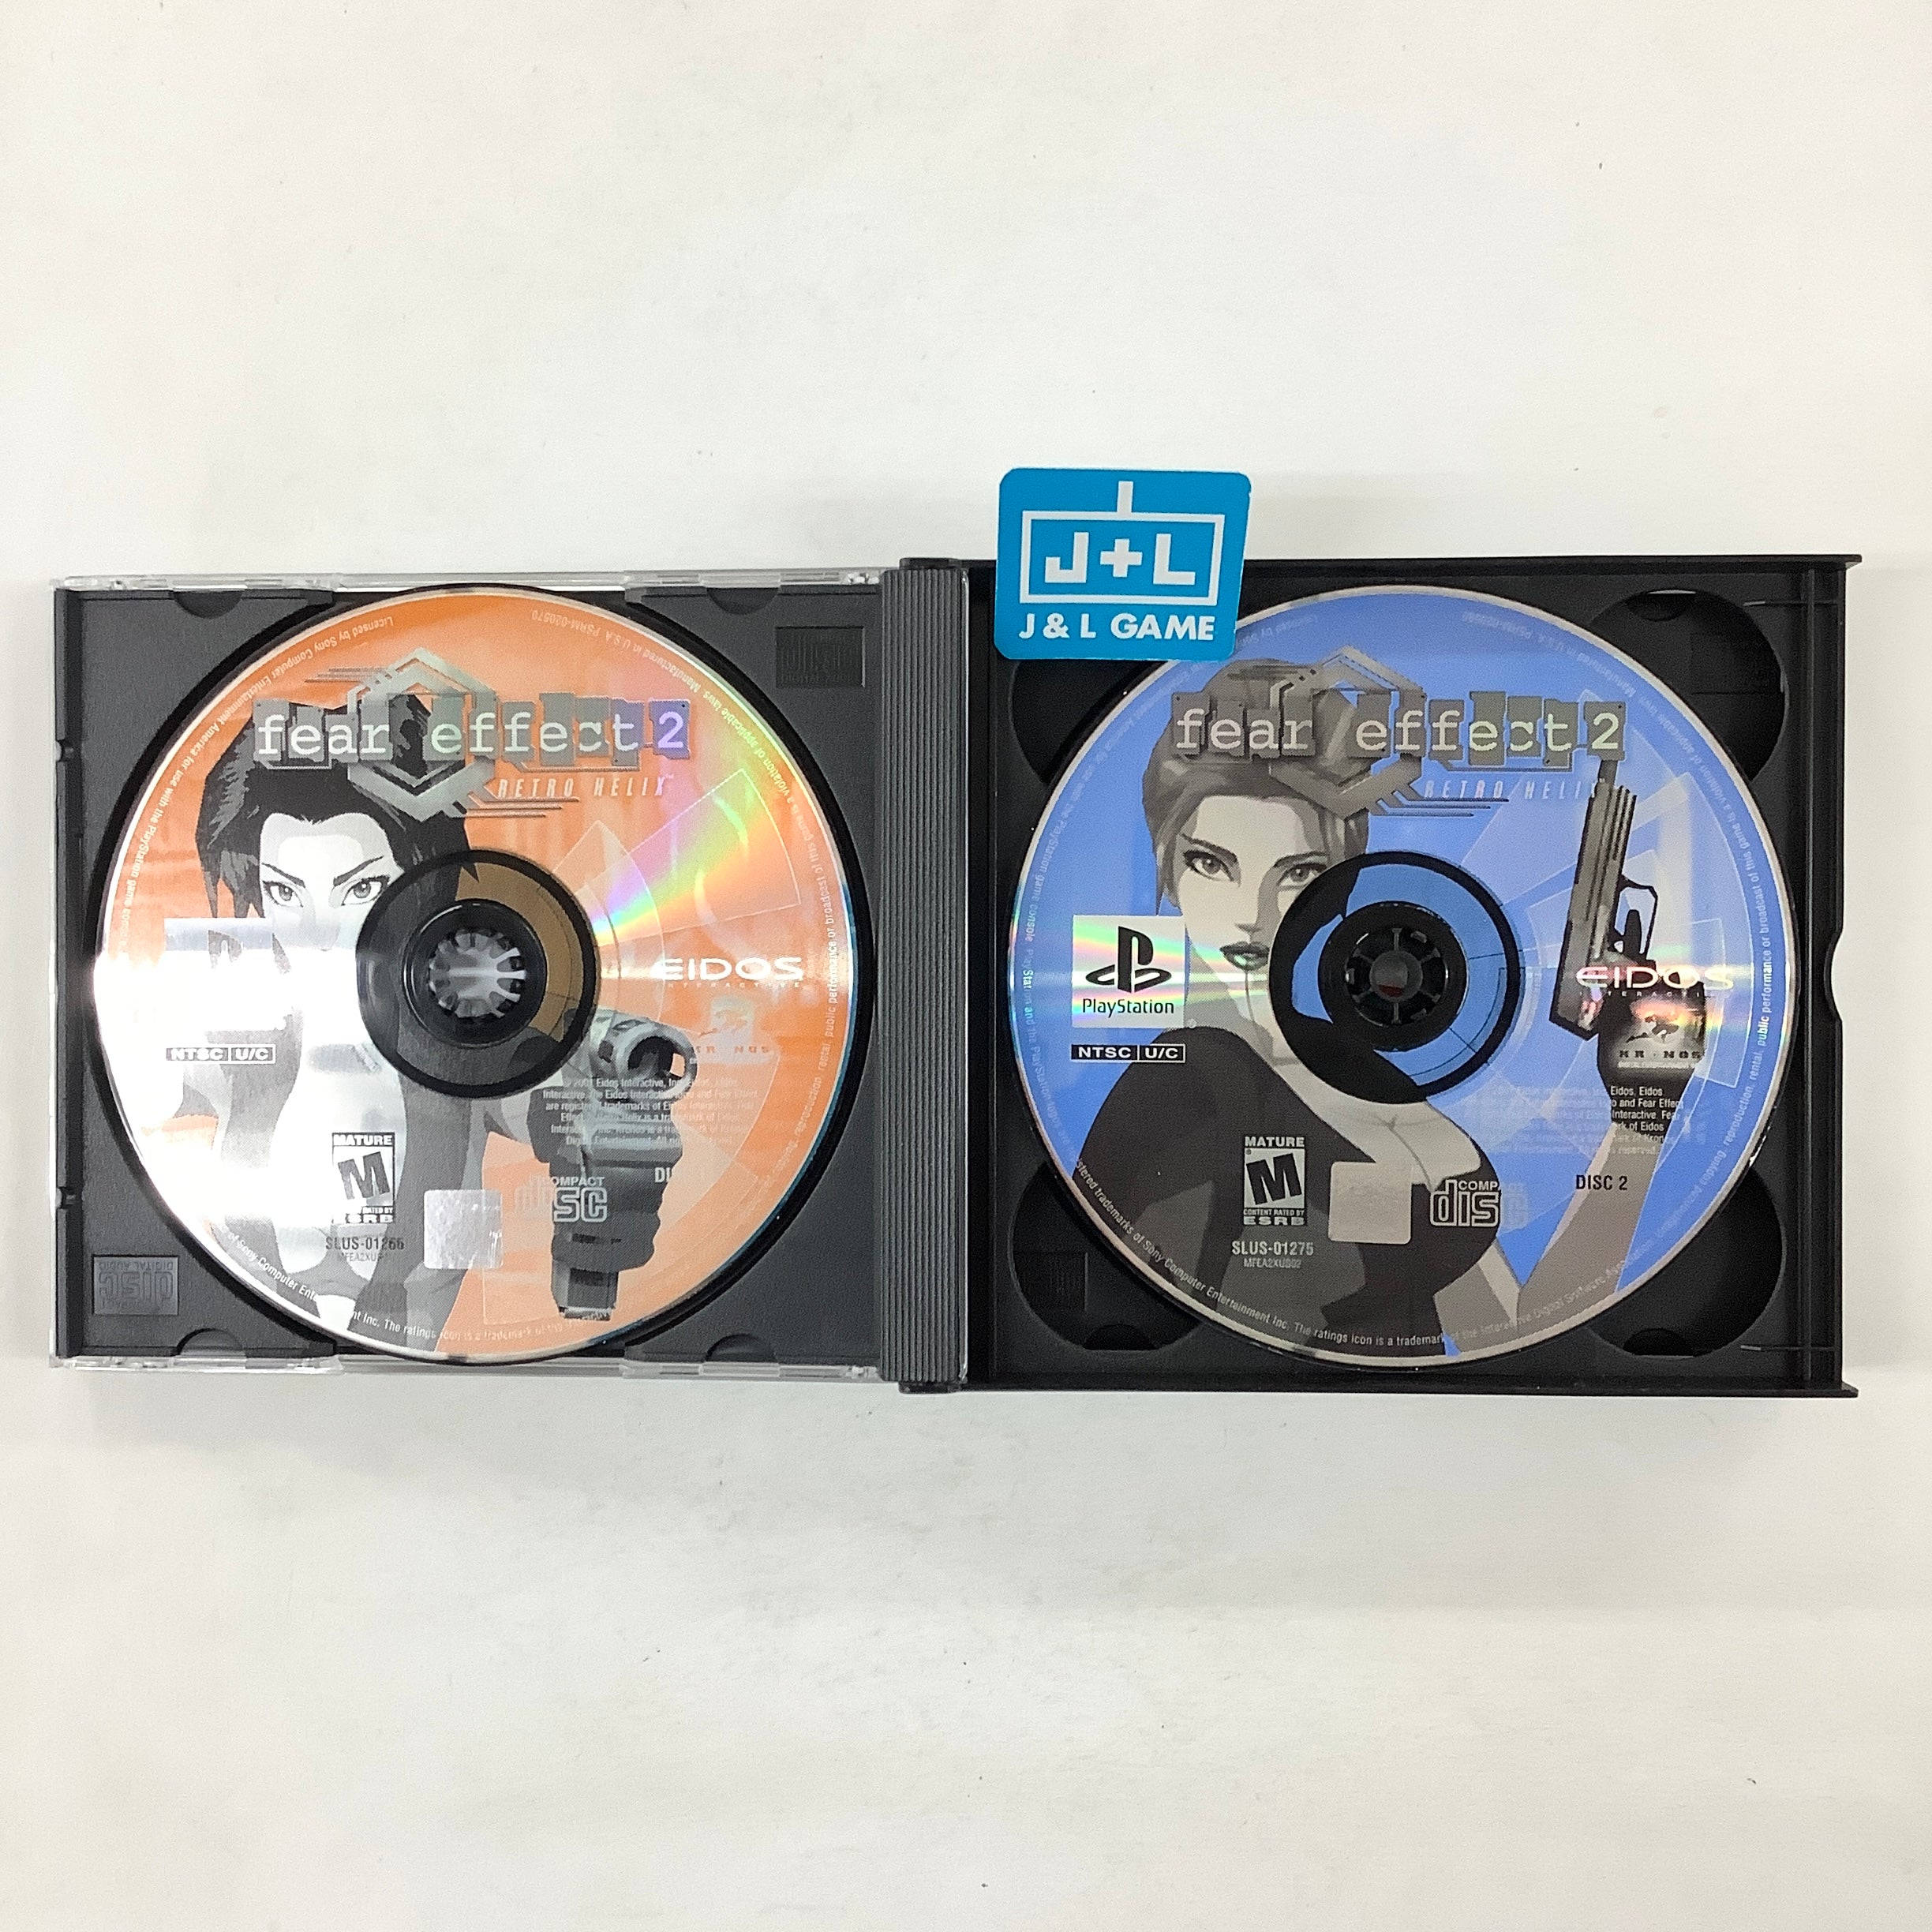 Fear Effect 2: Retro Helix  - (PS1) PlayStation 1 [Pre-Owned] Video Games Eidos Interactive   